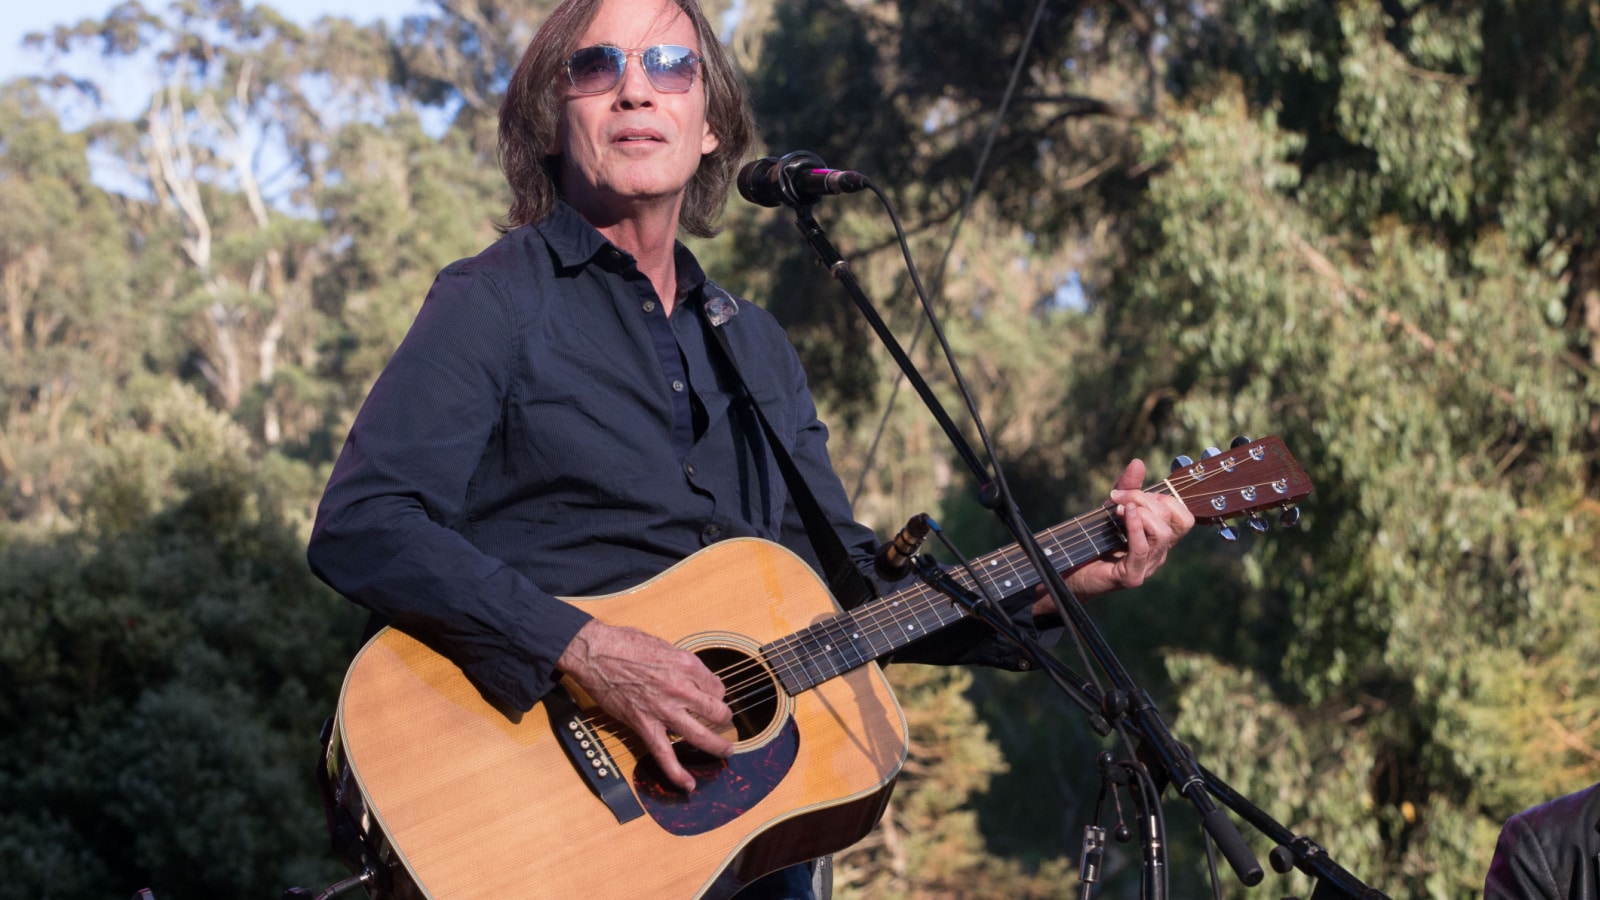 San Francisco, CA/USA - 10/1/16: Jackson Browne performs at Hardly Strictly Bluegrass in Golden Gate Park. In 2004 he was inducted into the Rock and Roll Hall of Fame.